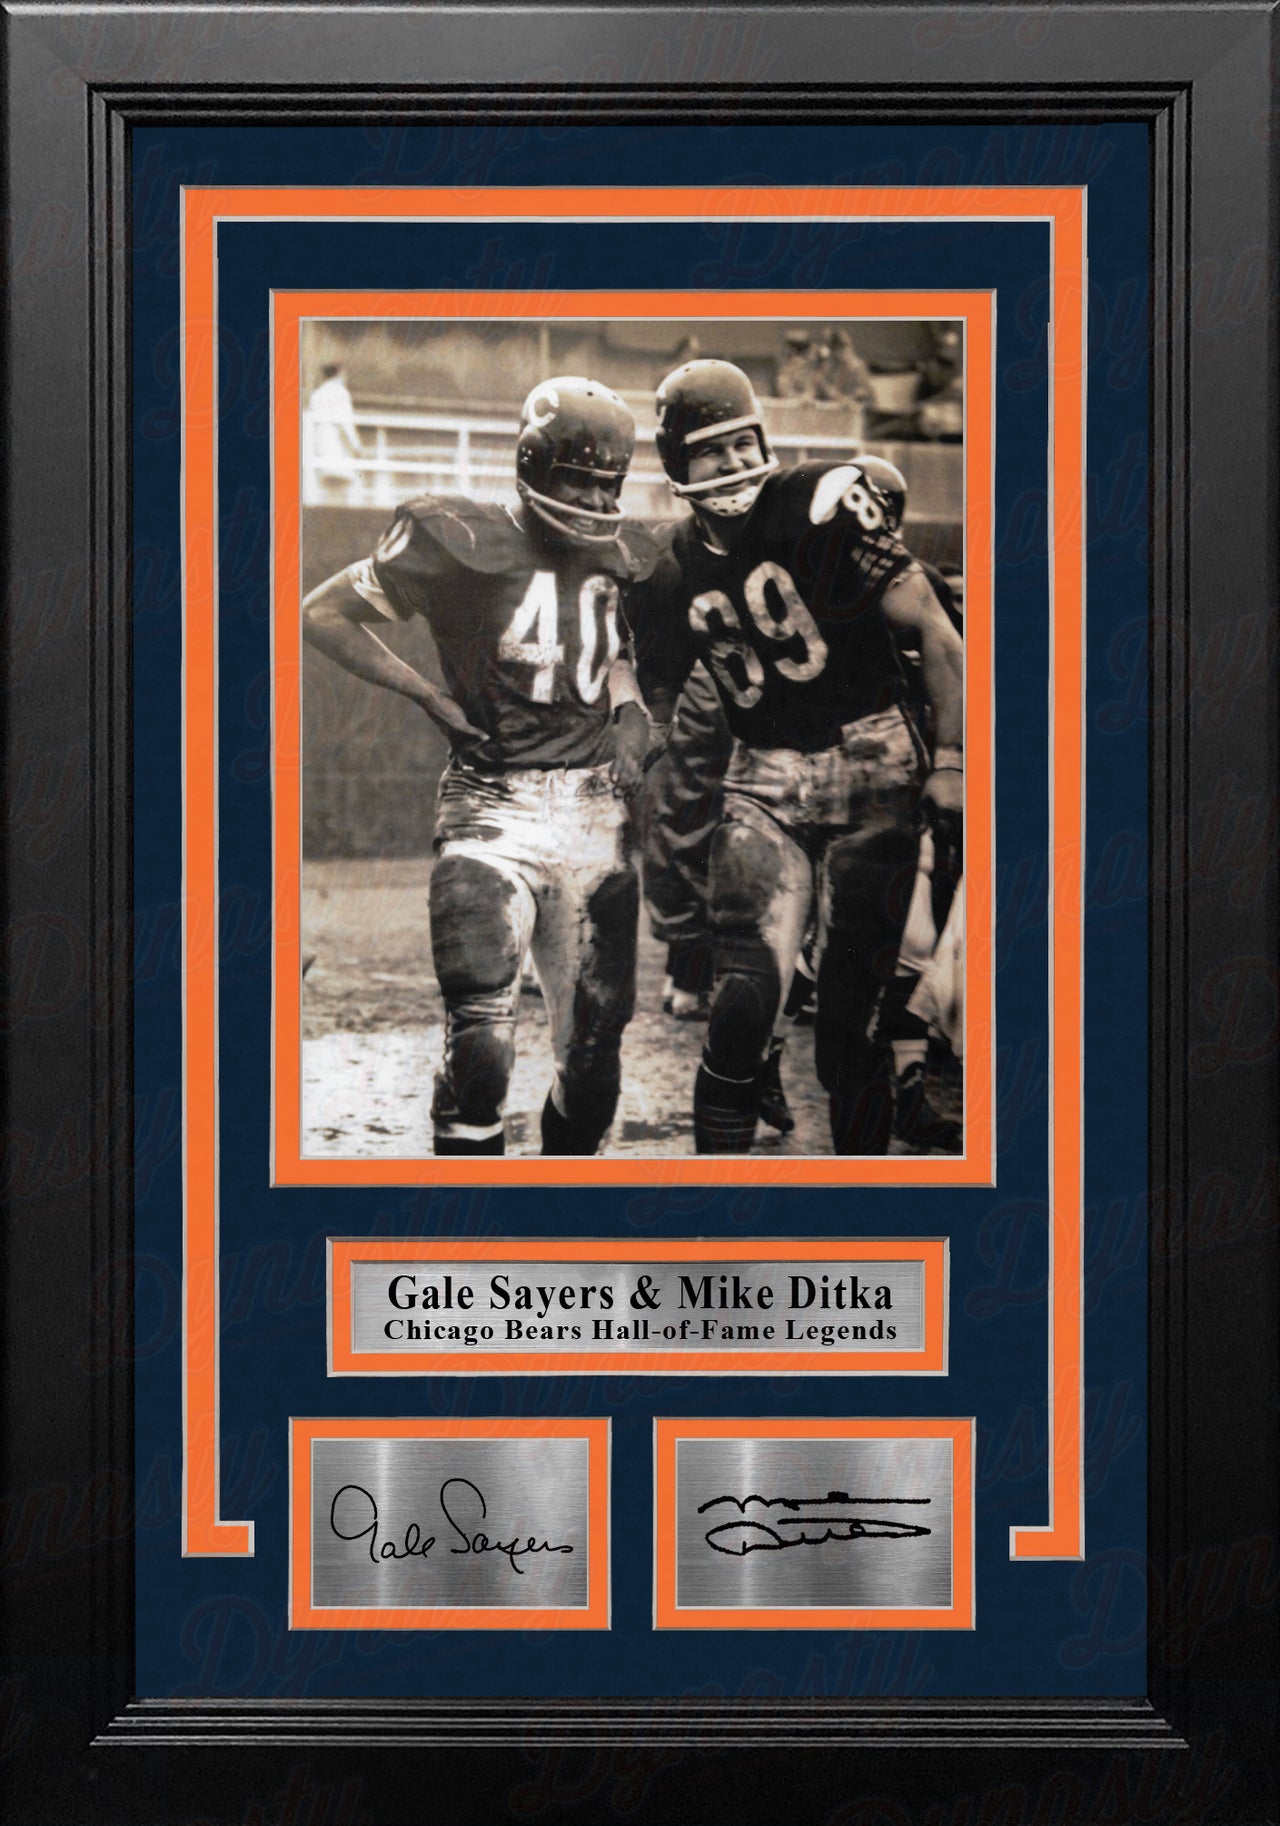 Gale Sayers & Mike Ditka Chicago Bears 8" x 10" Framed Black & White Photo with Engraved Autographs